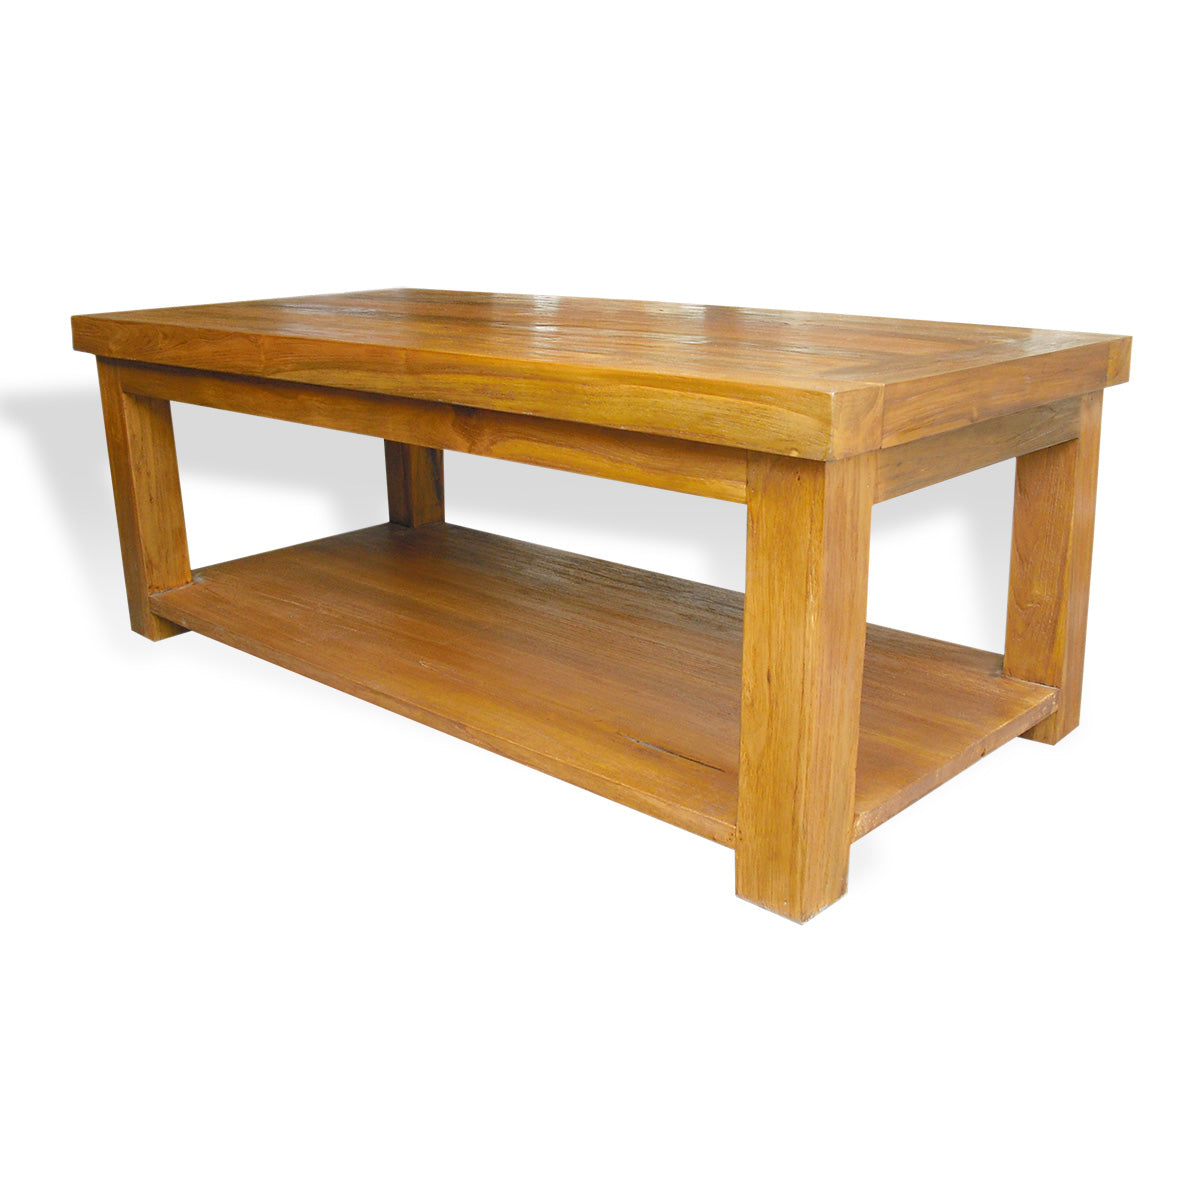 KYT-SPSB002 NATURAL RECYCLED TEAK WOOD COFFEE TABLE WITH SHELF